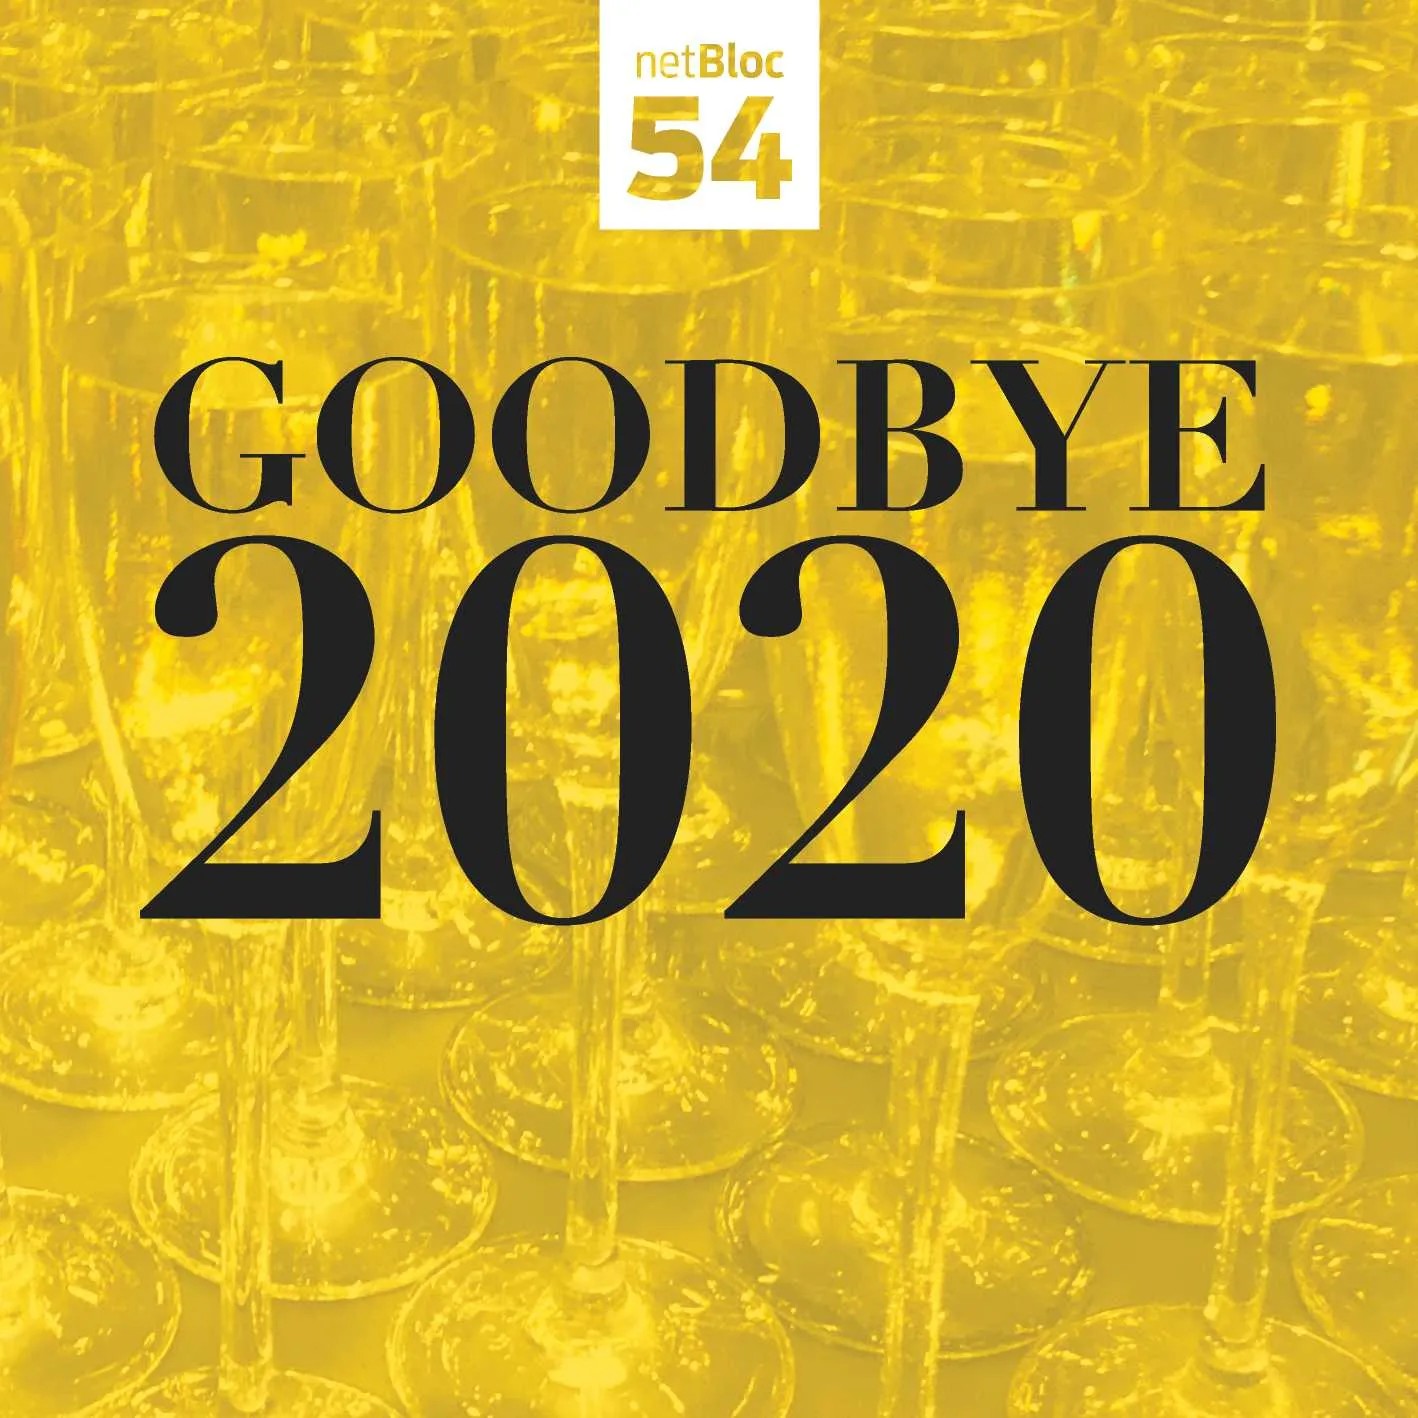 Album cover for “netBloc Vol. 54: Goodbye 2020” by Various Artists